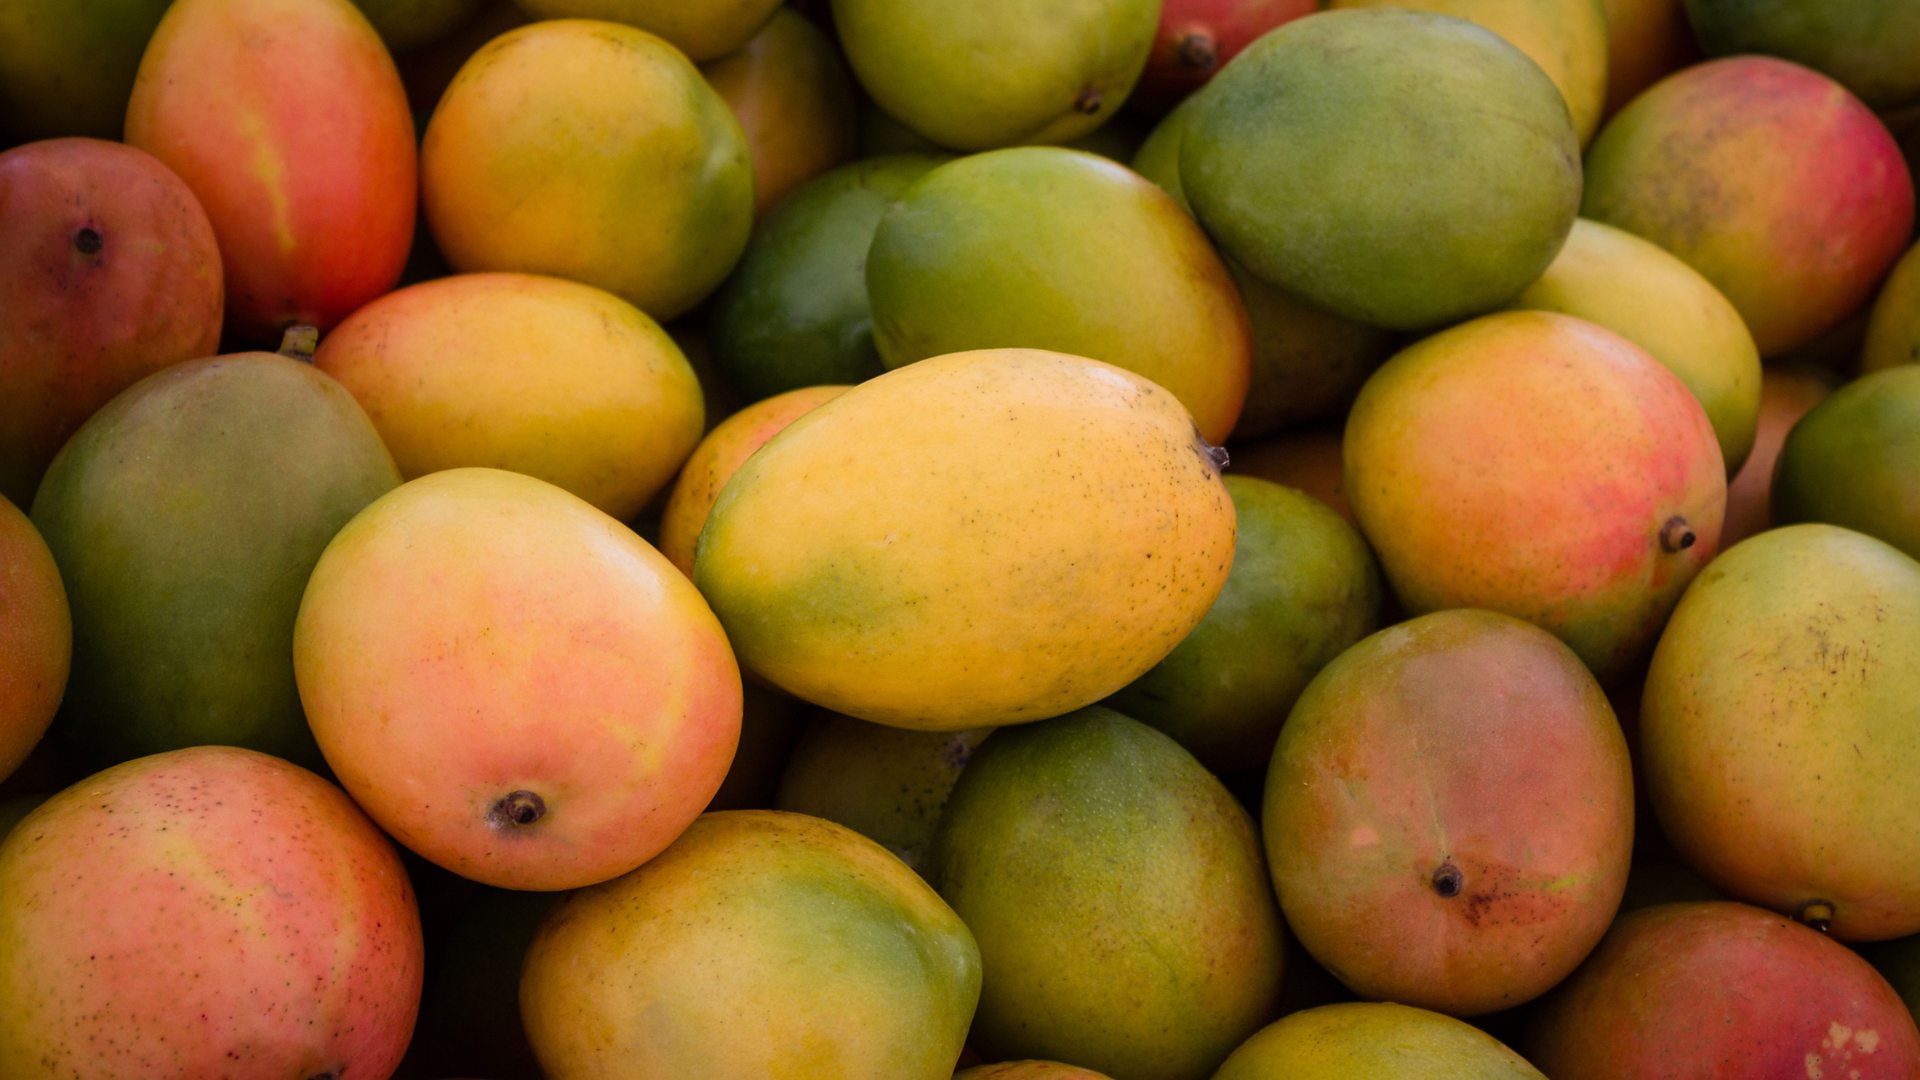 BBC Radio 4 - Radio 4 in Four - 13 juicy facts about mangoes  Health Benefits Of Eating Mango Regularly p06hk0h6